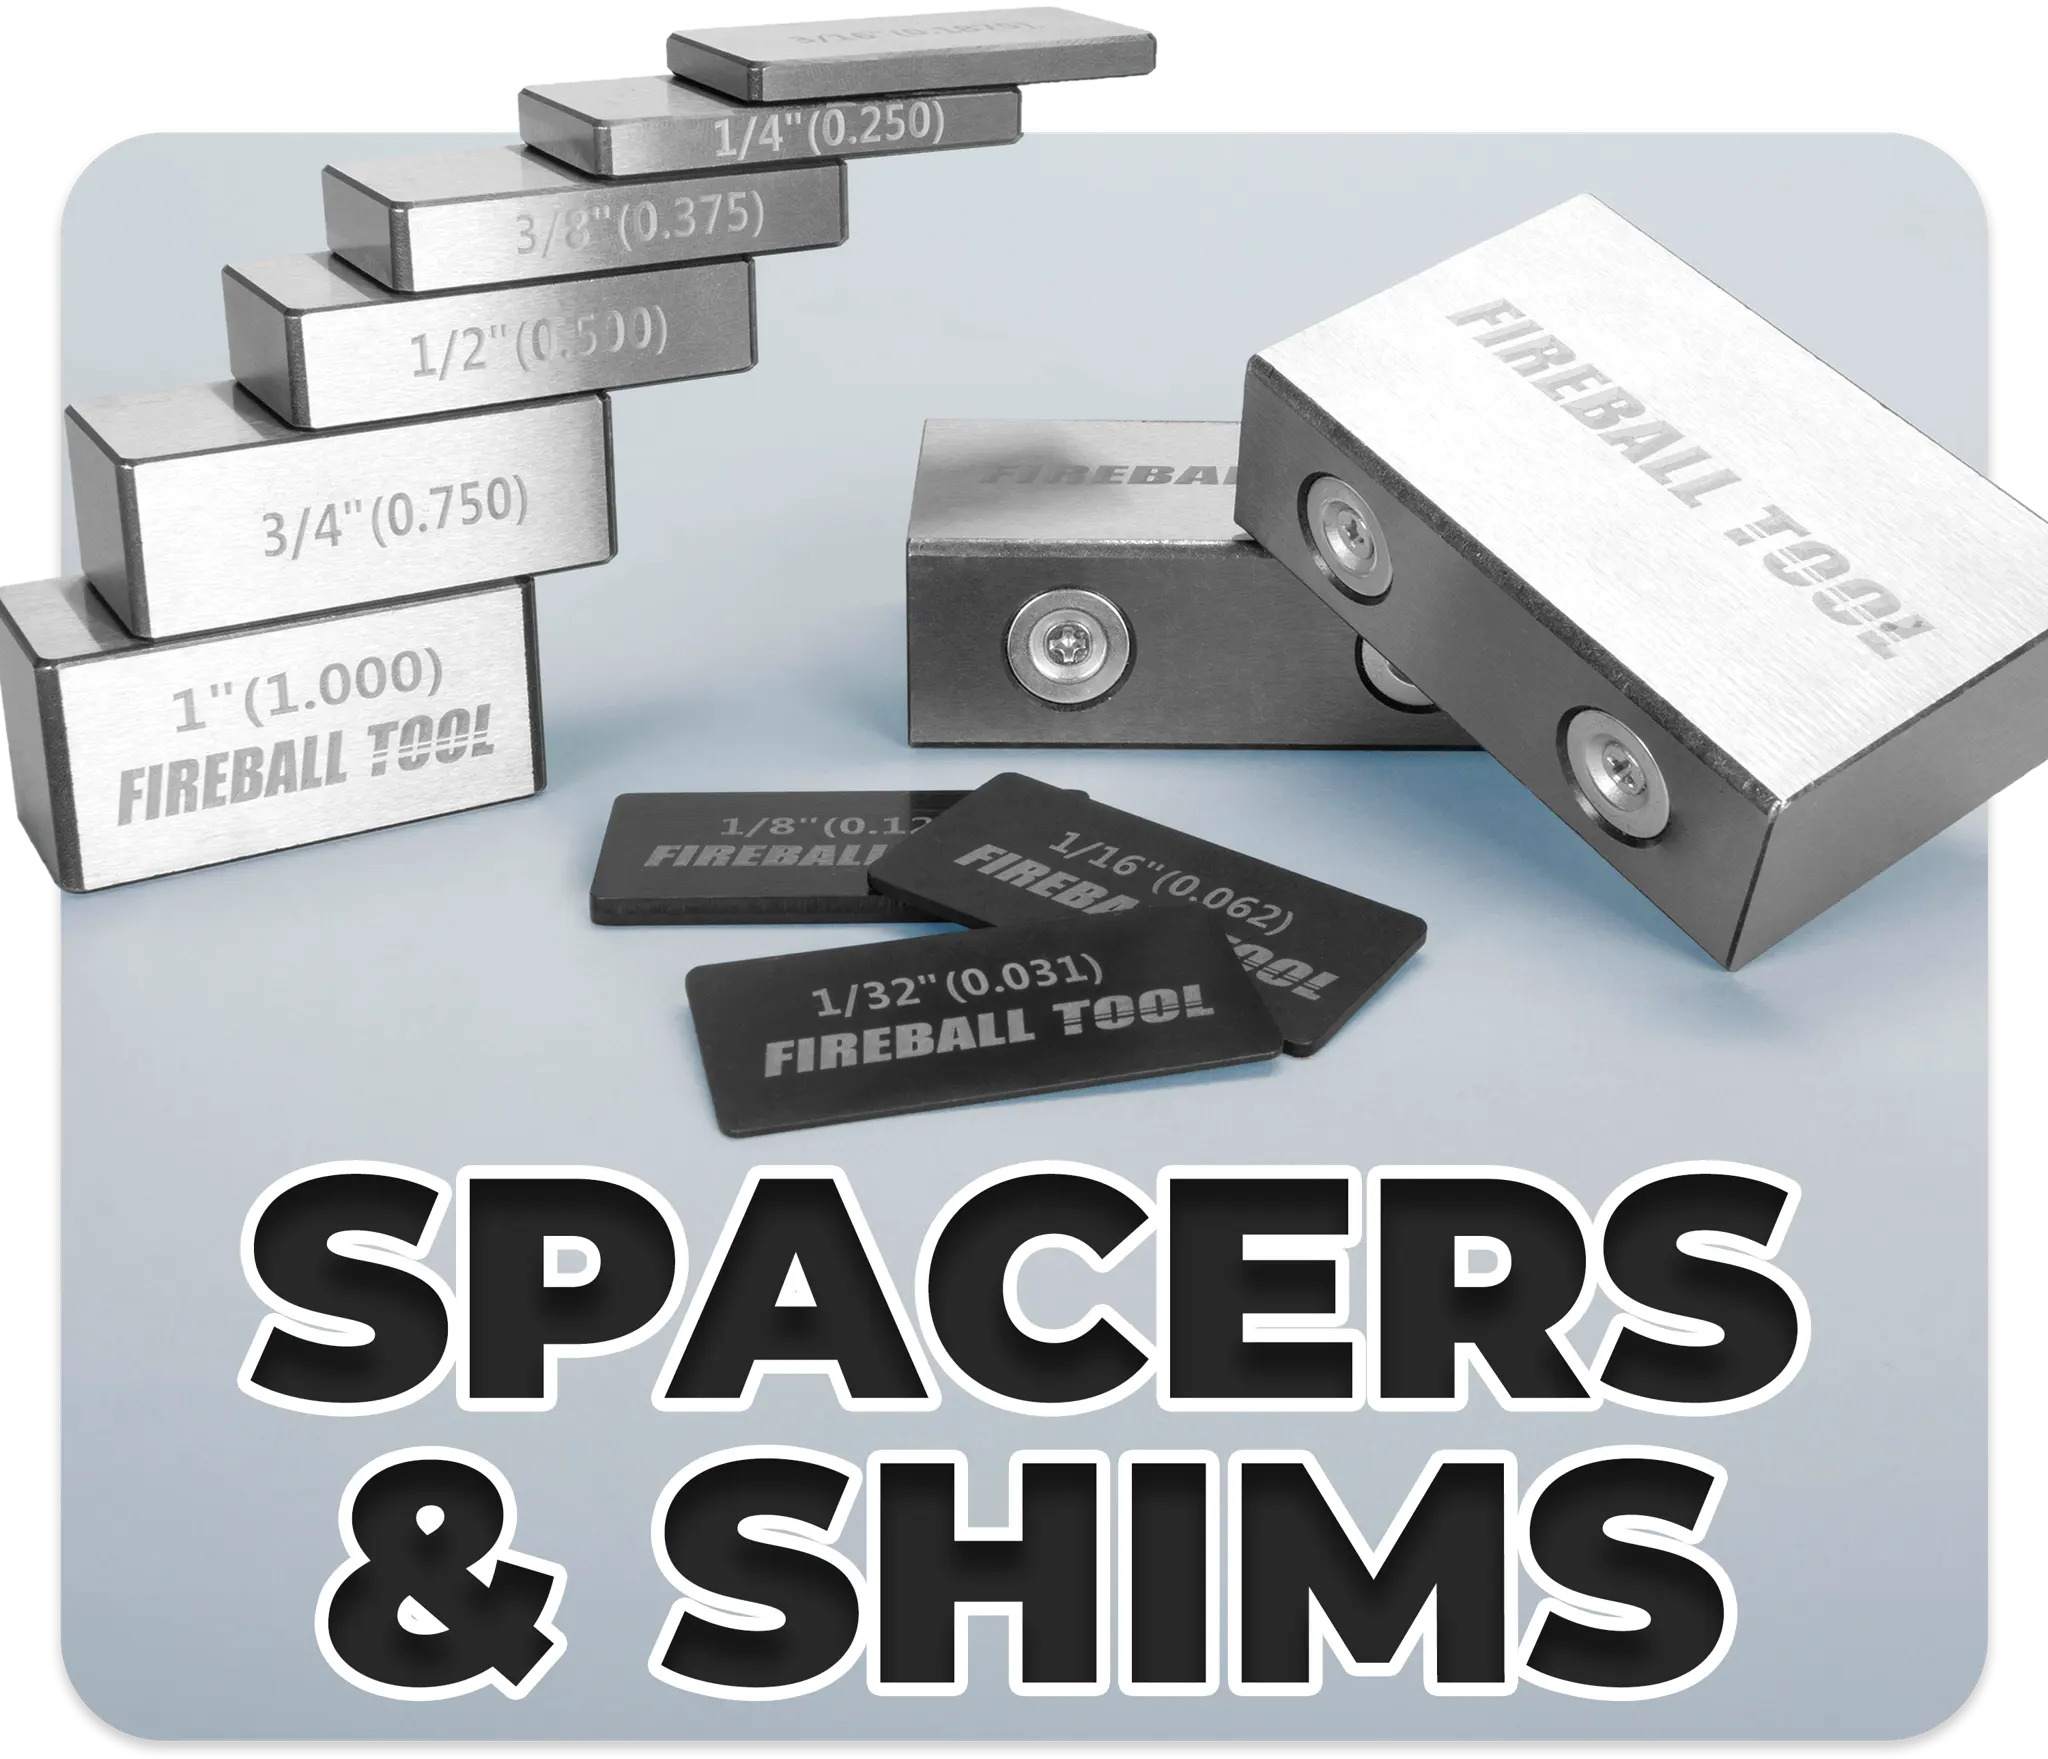 Spacers & Shims